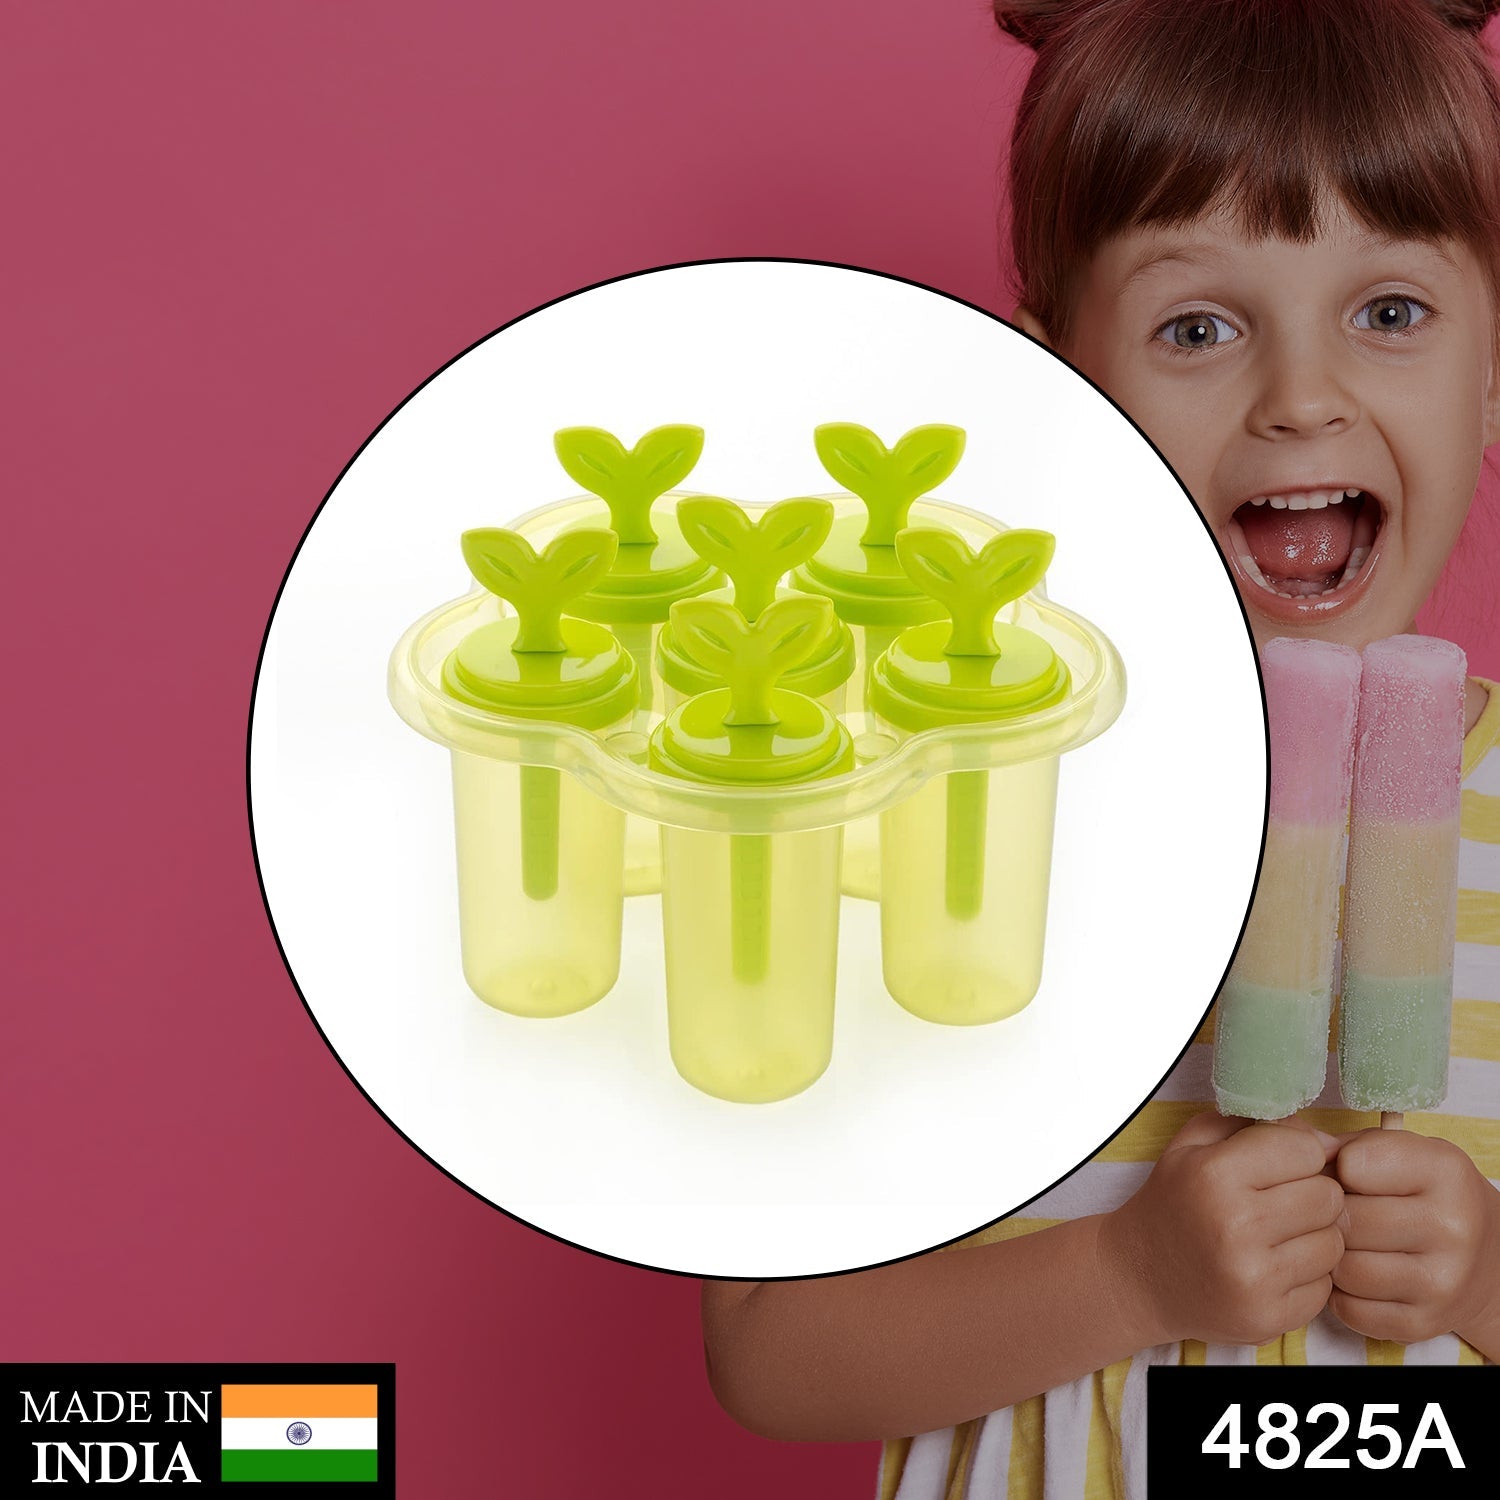 4825A 6 Cavity Ice Candy Maker For Making Ice Candies And All Easily. DeoDap